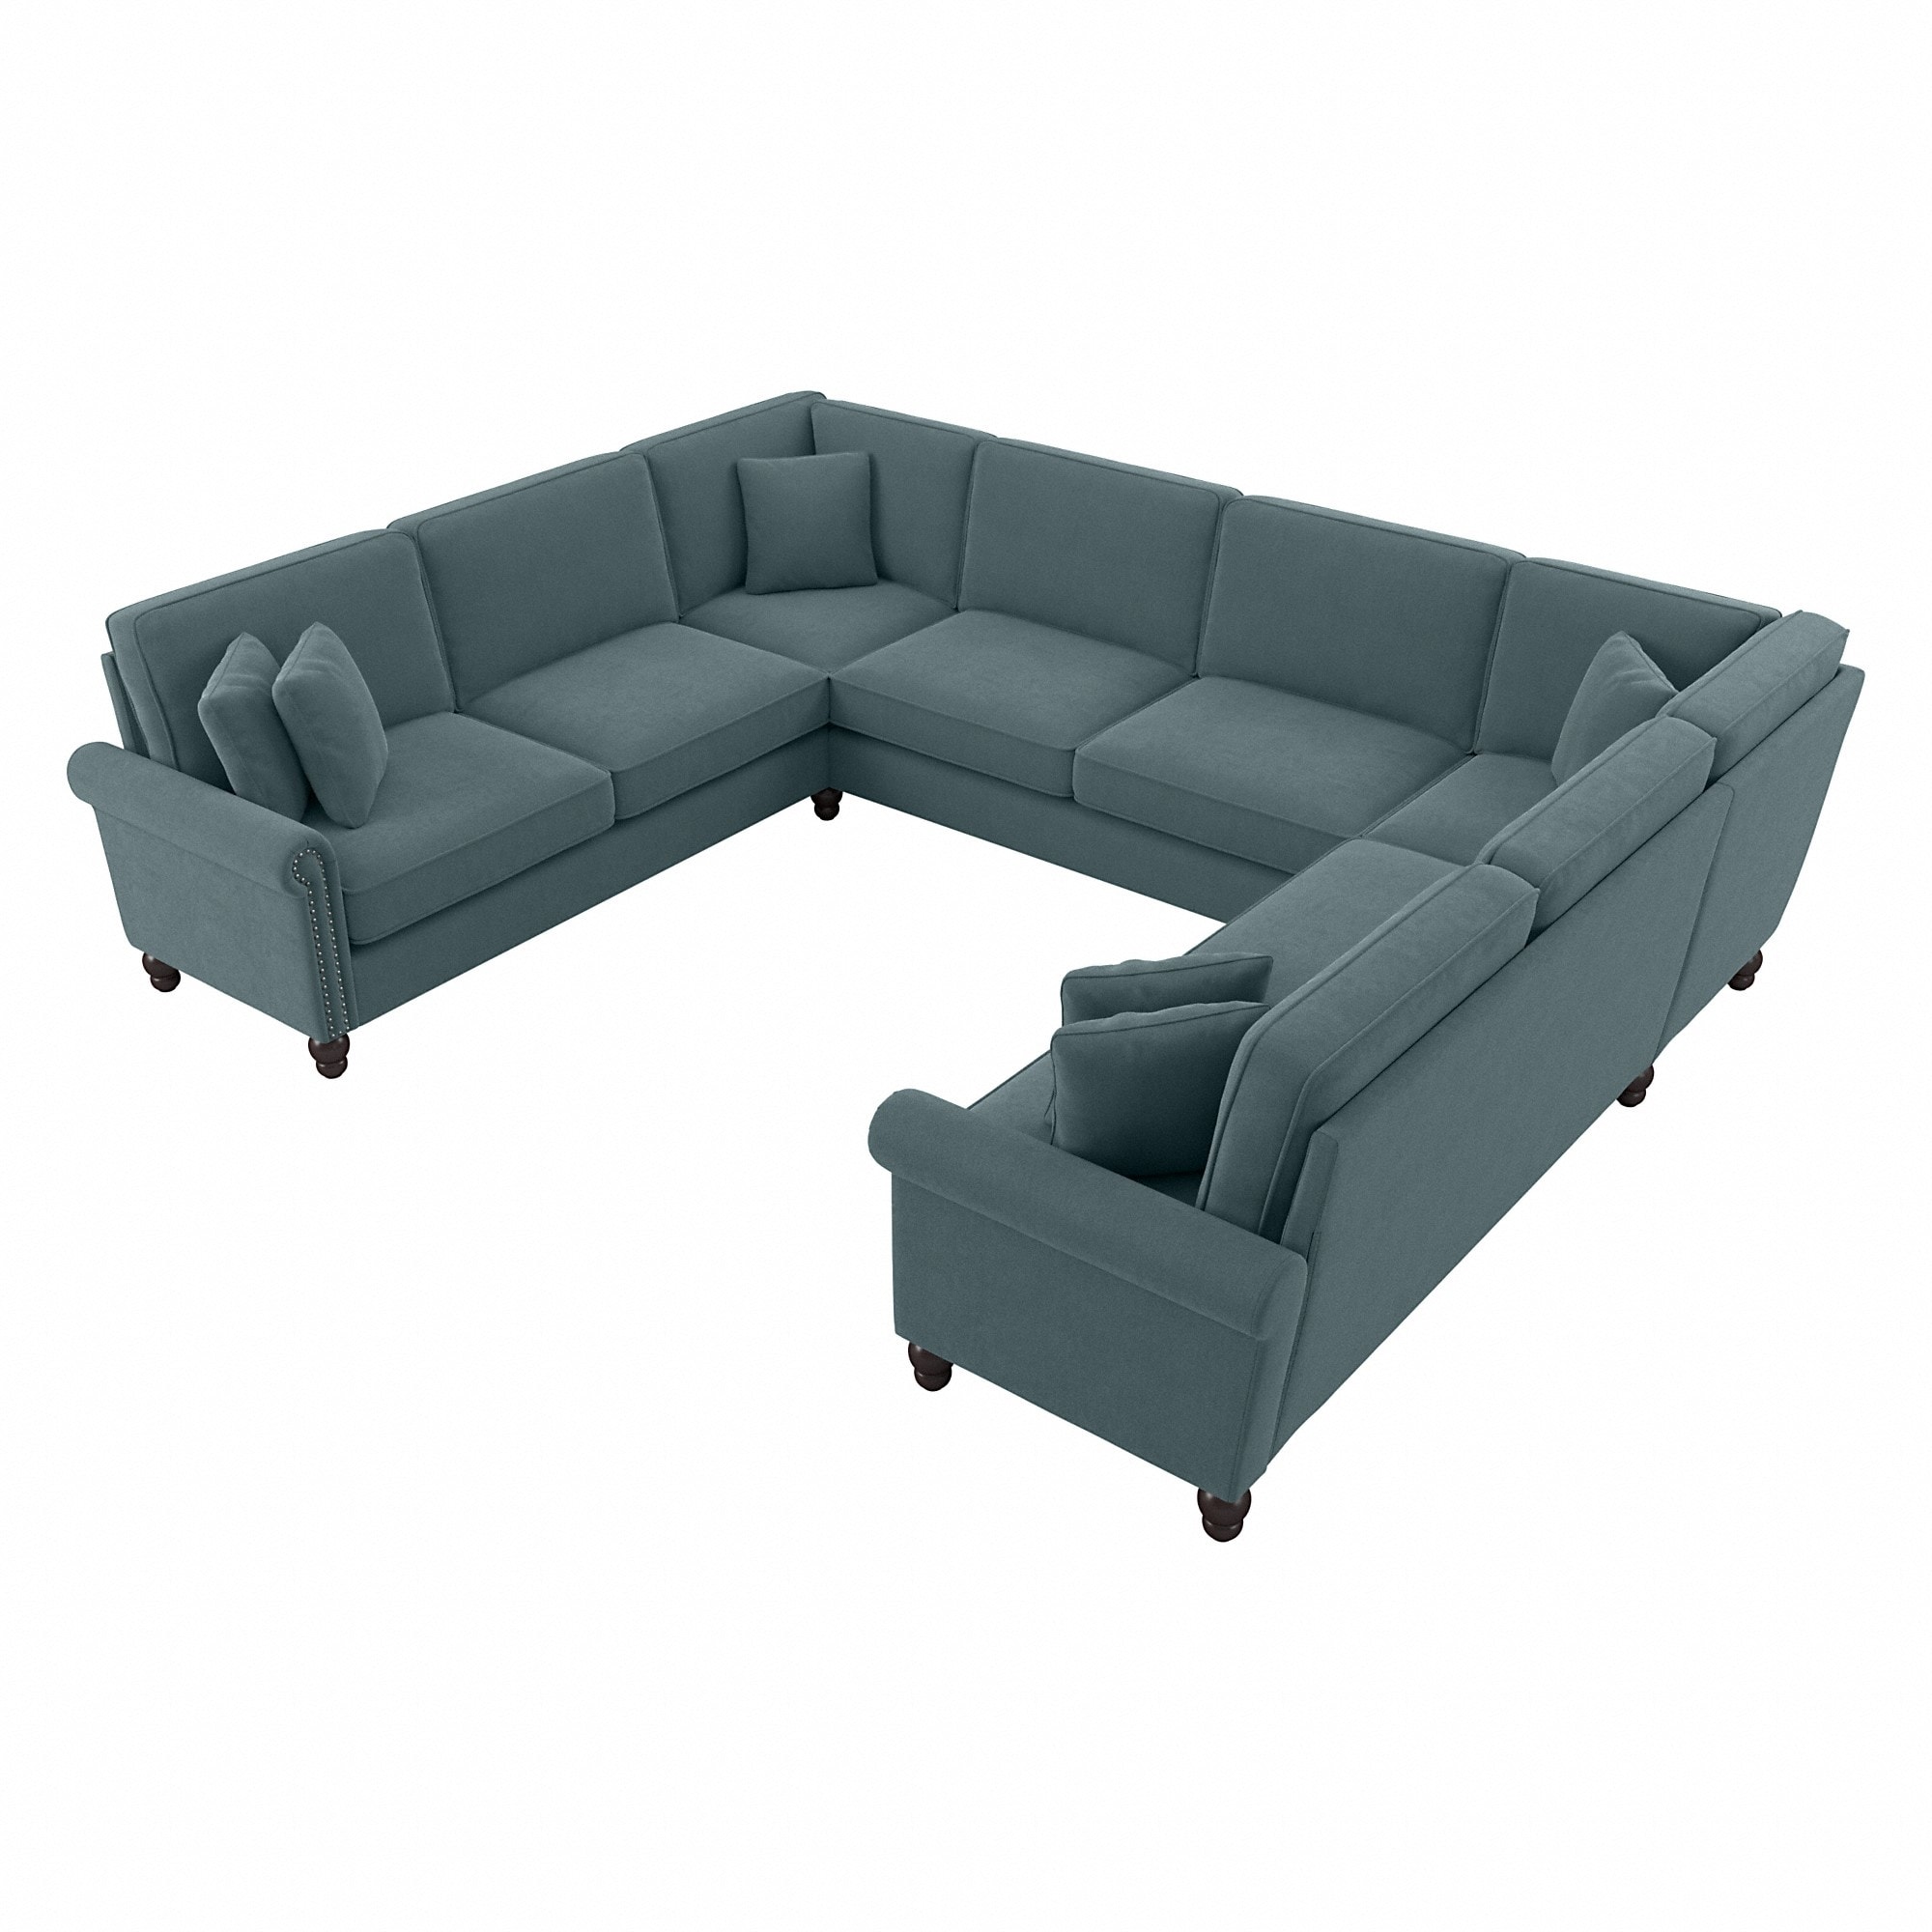 Bush Furniture Coventry 125W U Shaped Sectional Couch by